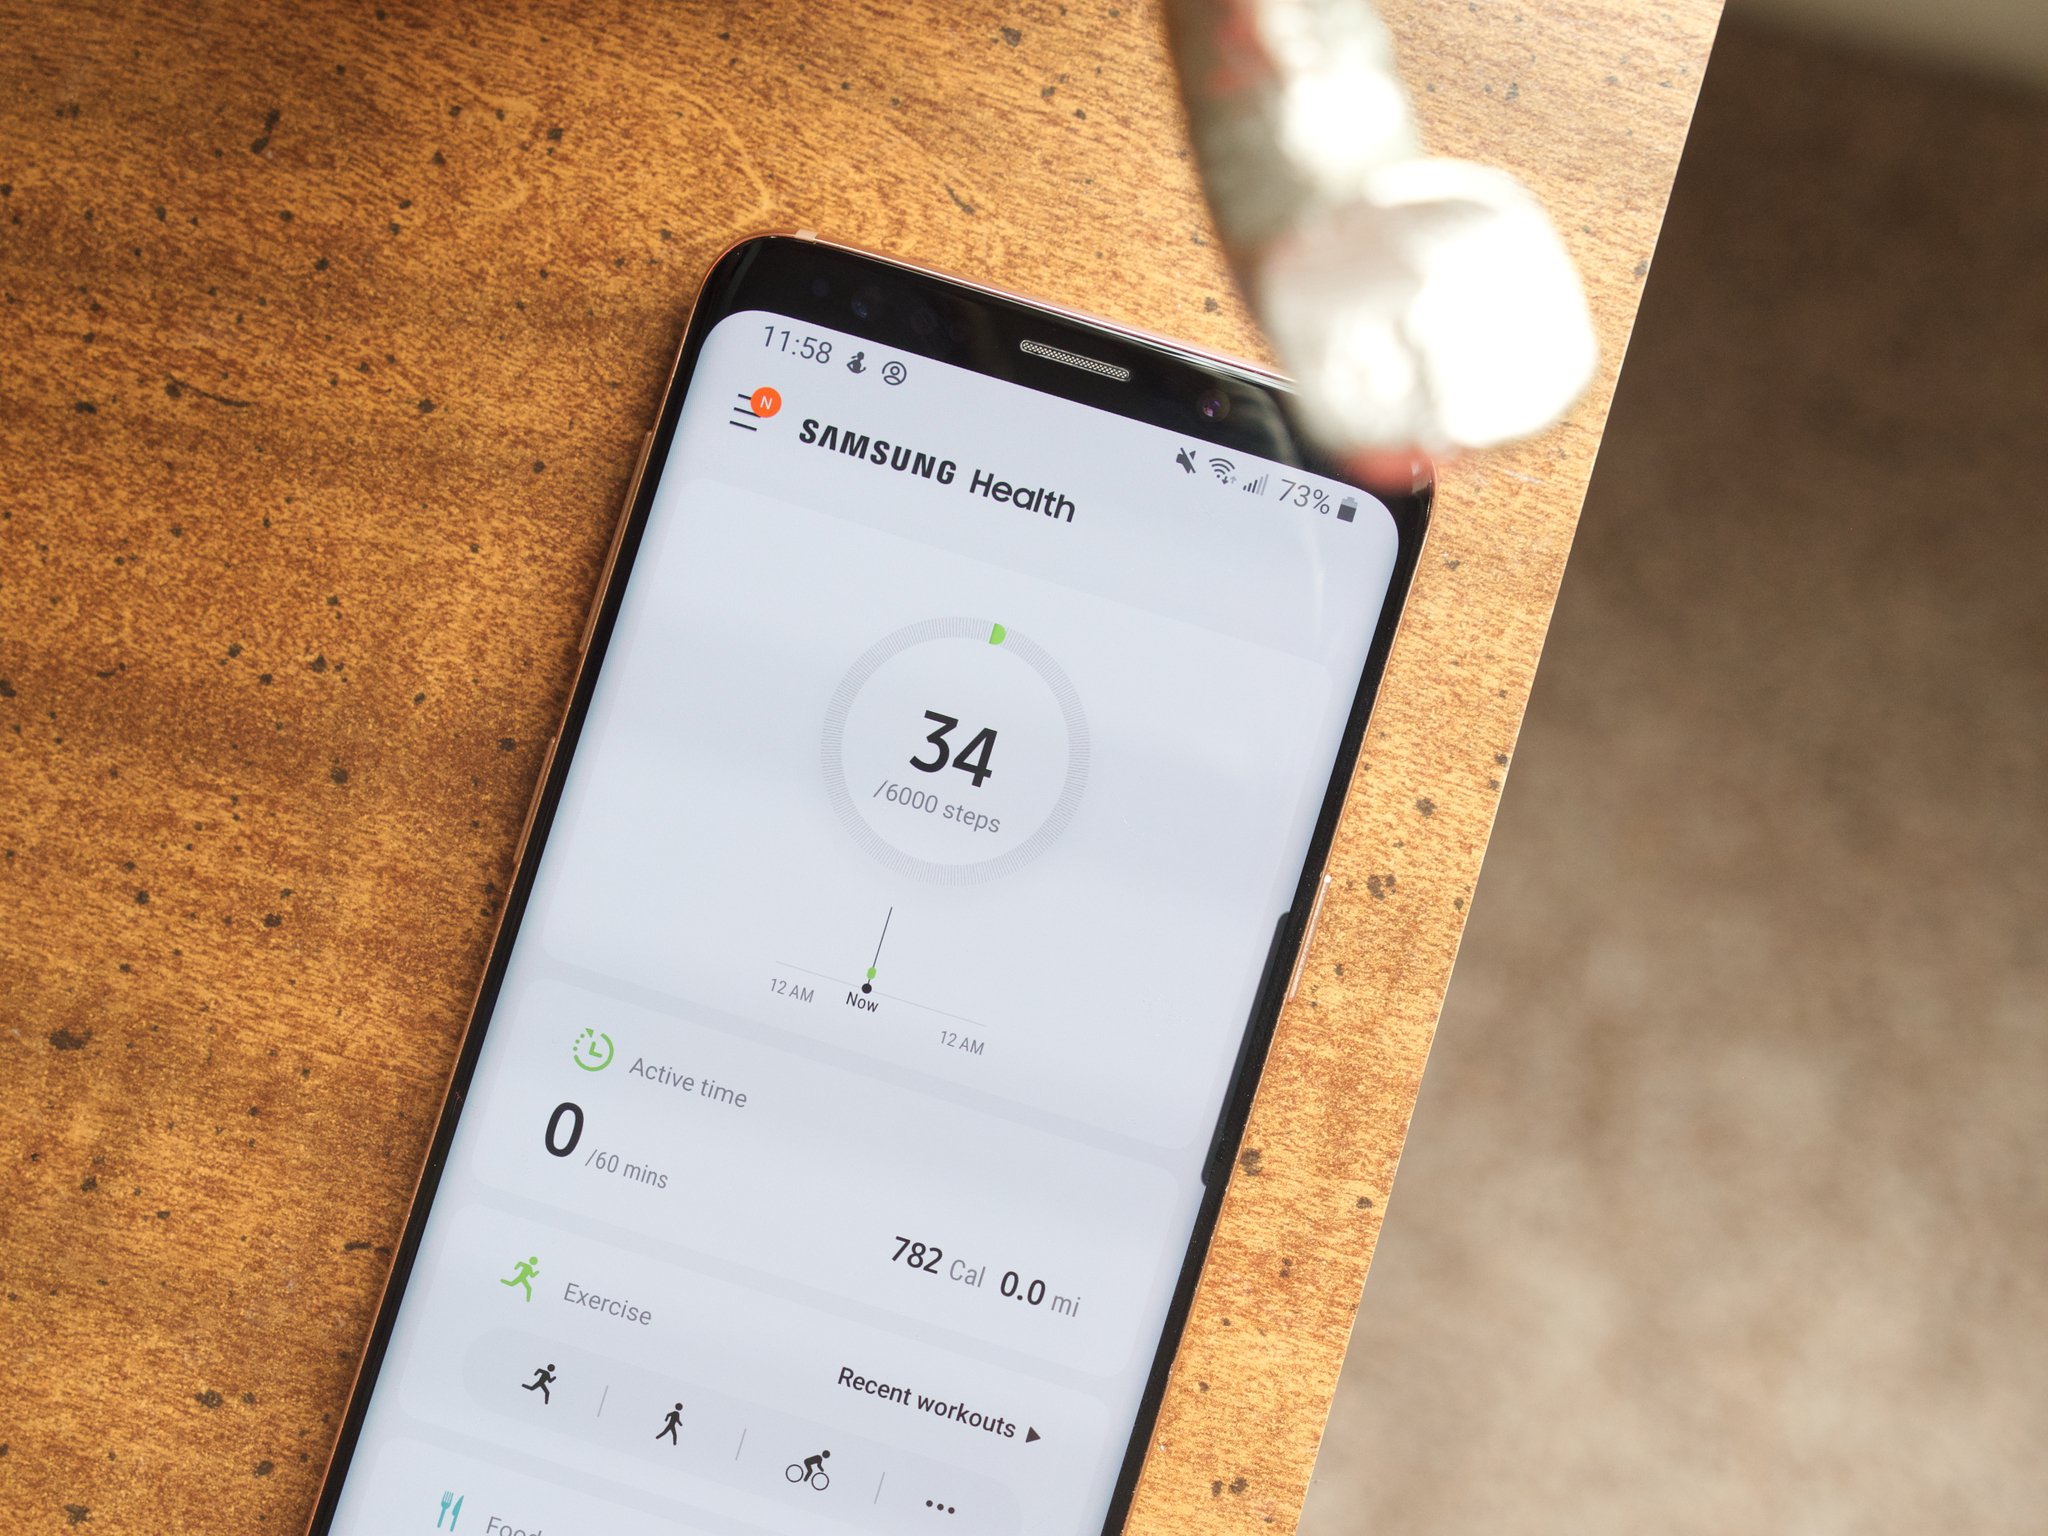 Samsung Health takes first place among our readers’ favorite fitness apps